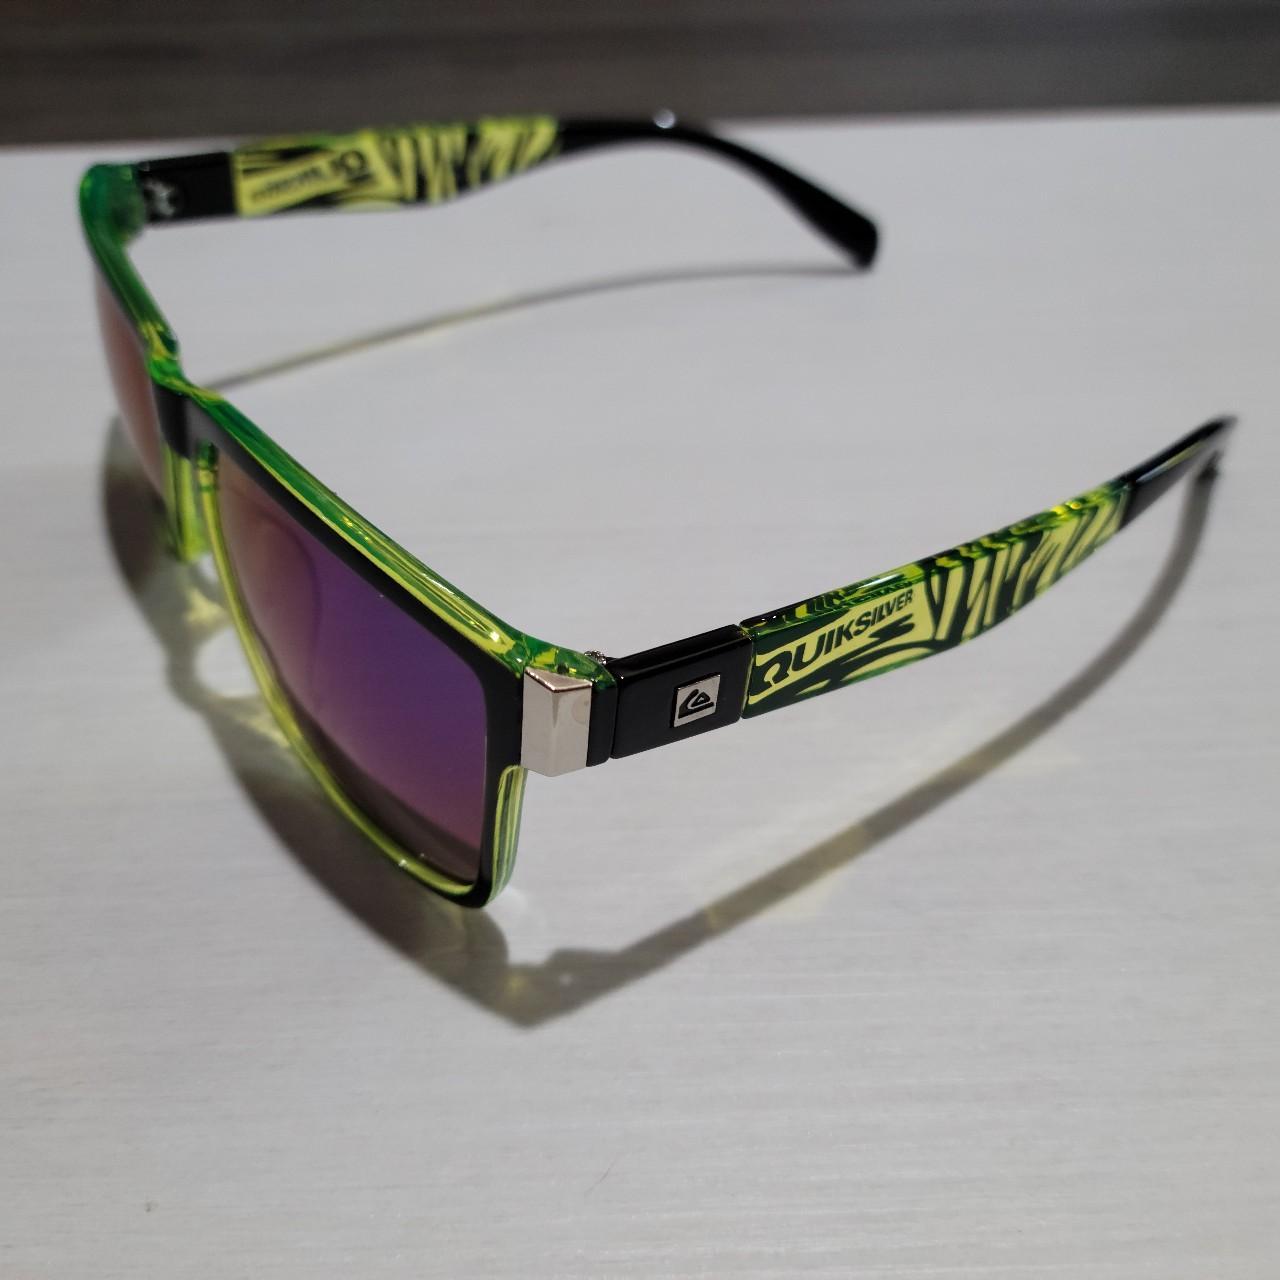 Depop - New and black... sunglasses, quiksilver polarized green